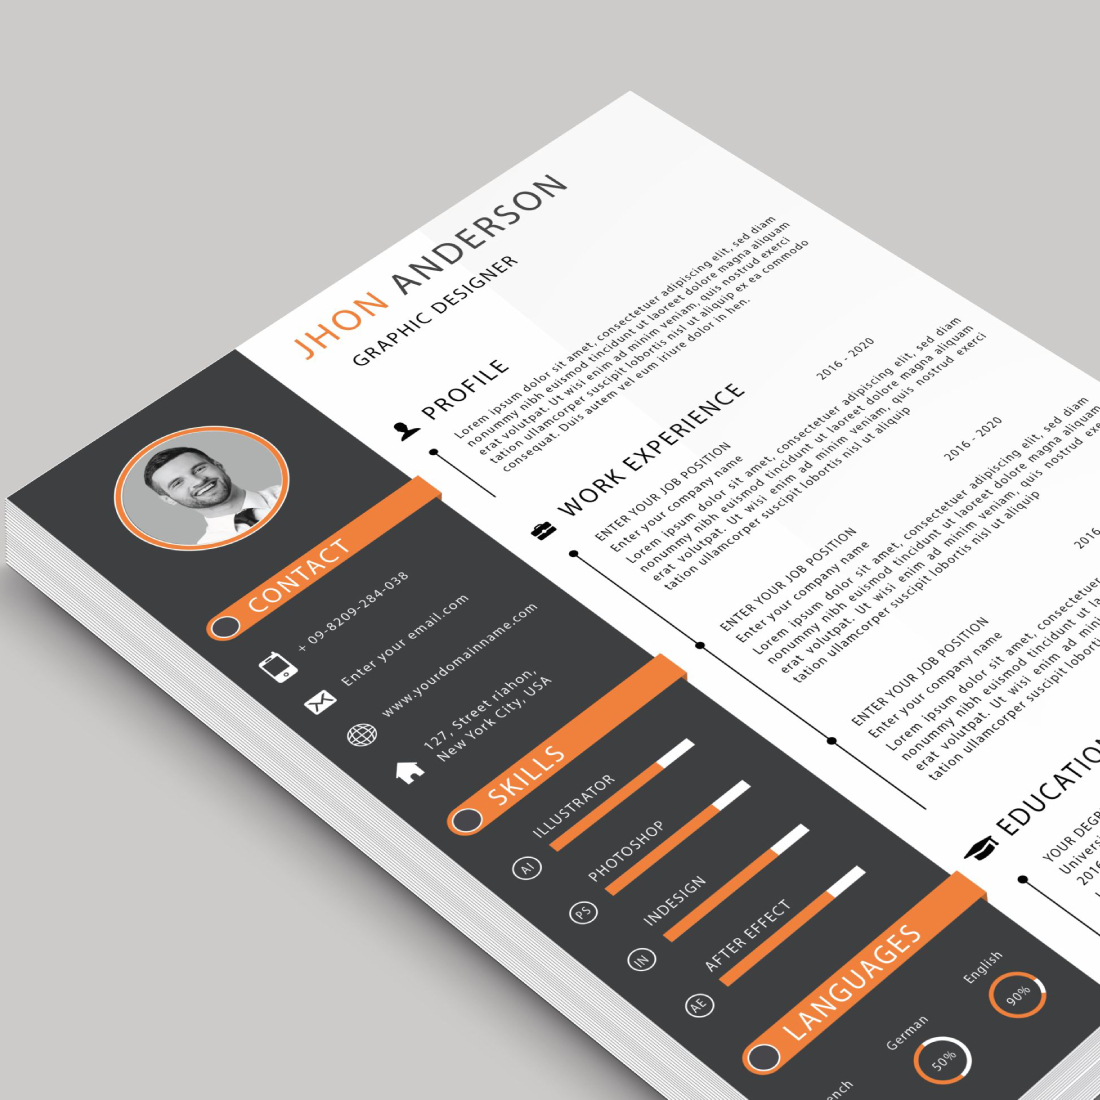 Professional resume template with orange accents.